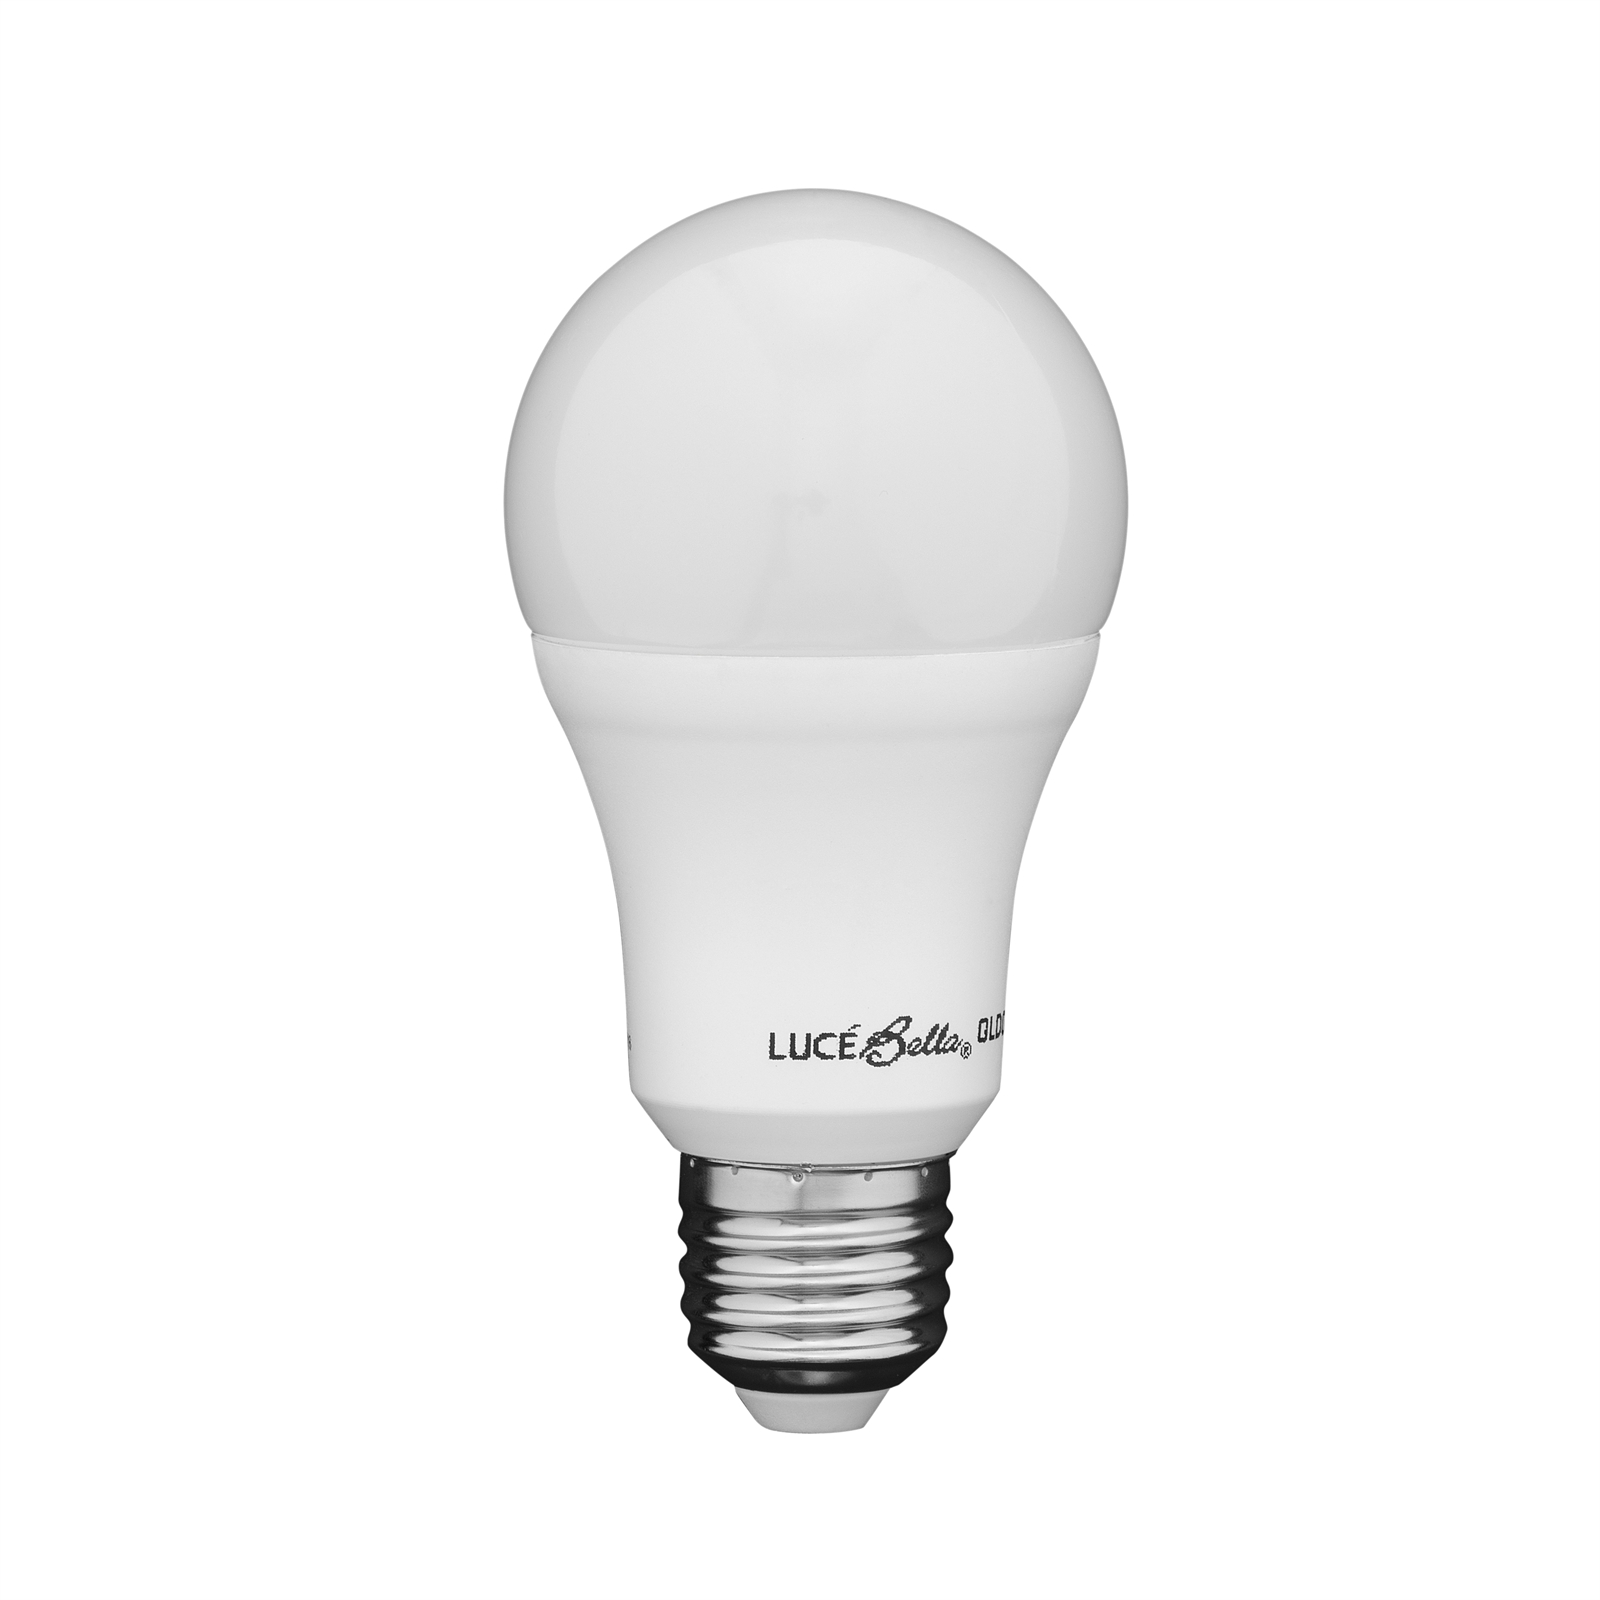 Luce Bella 10W Daylight Dimmable LED Globe - 2 Pack